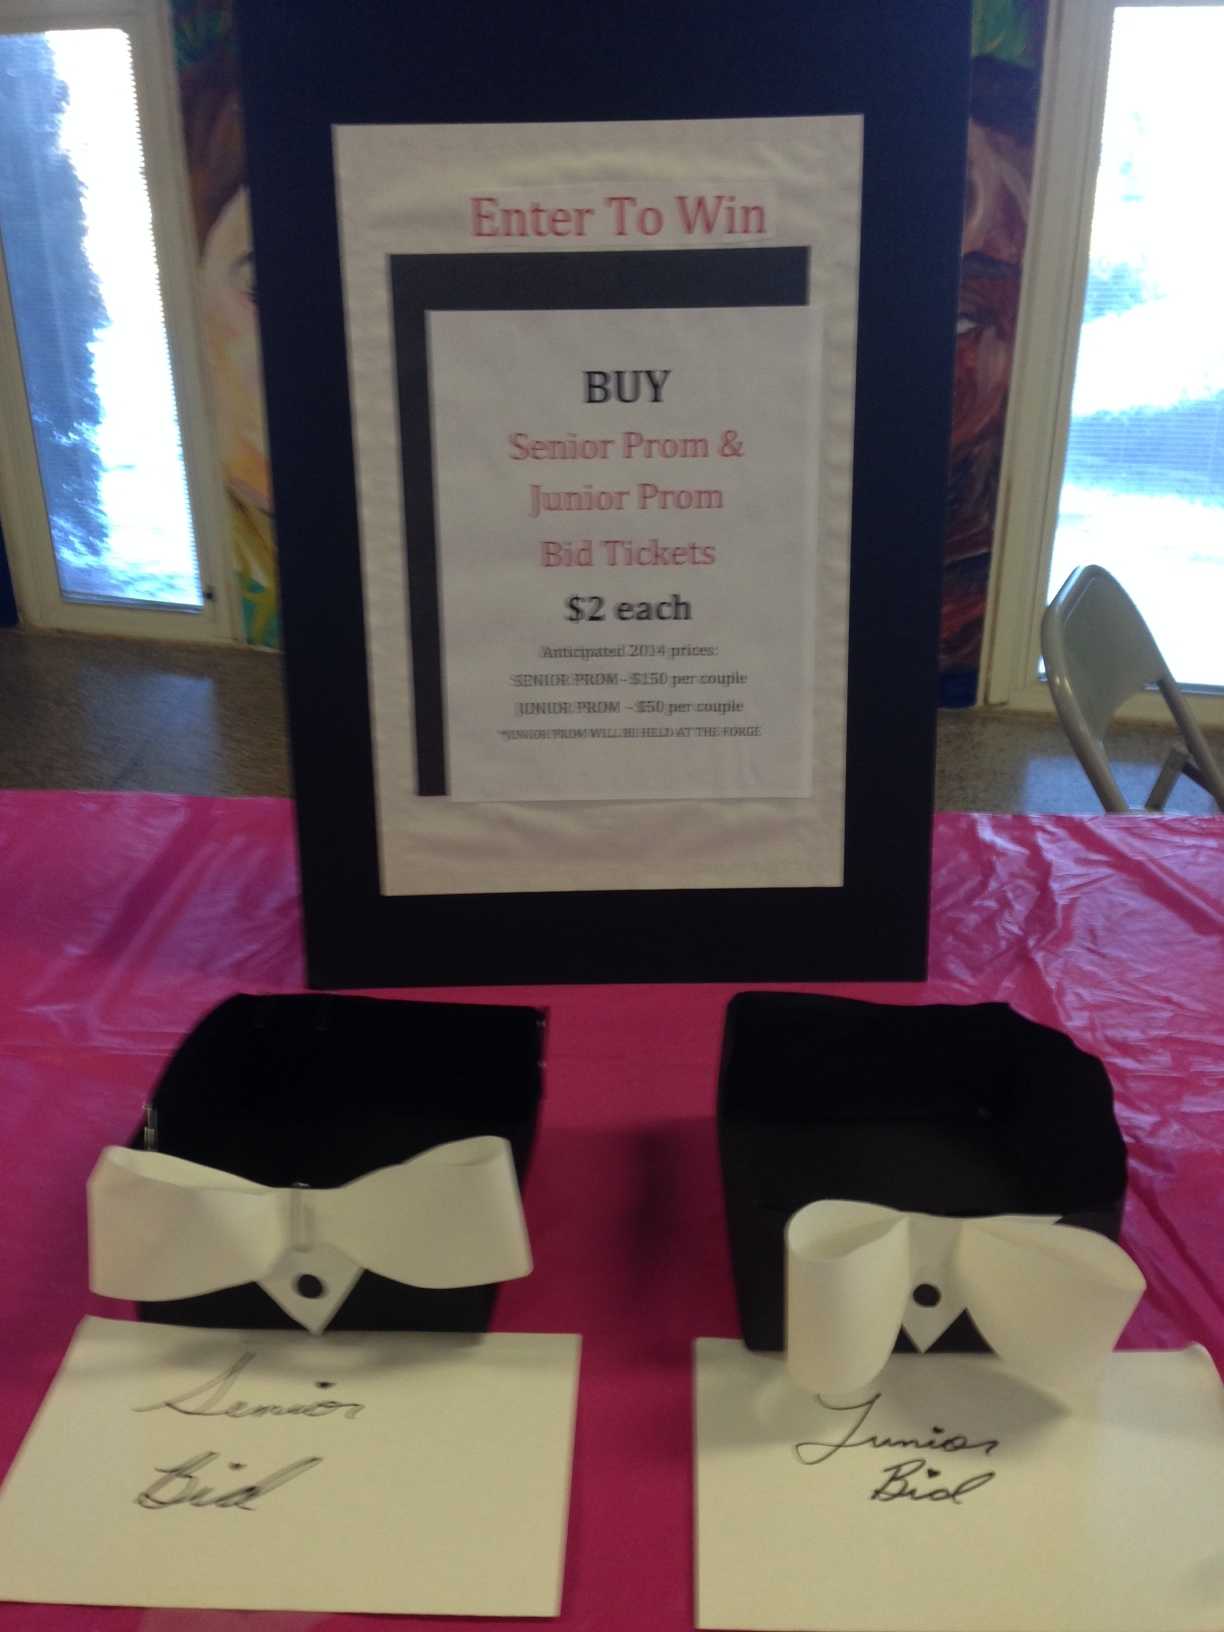 During the Prom Fashion Show, students could enter the raffle to win a free bid to the Prom and Cotillion.